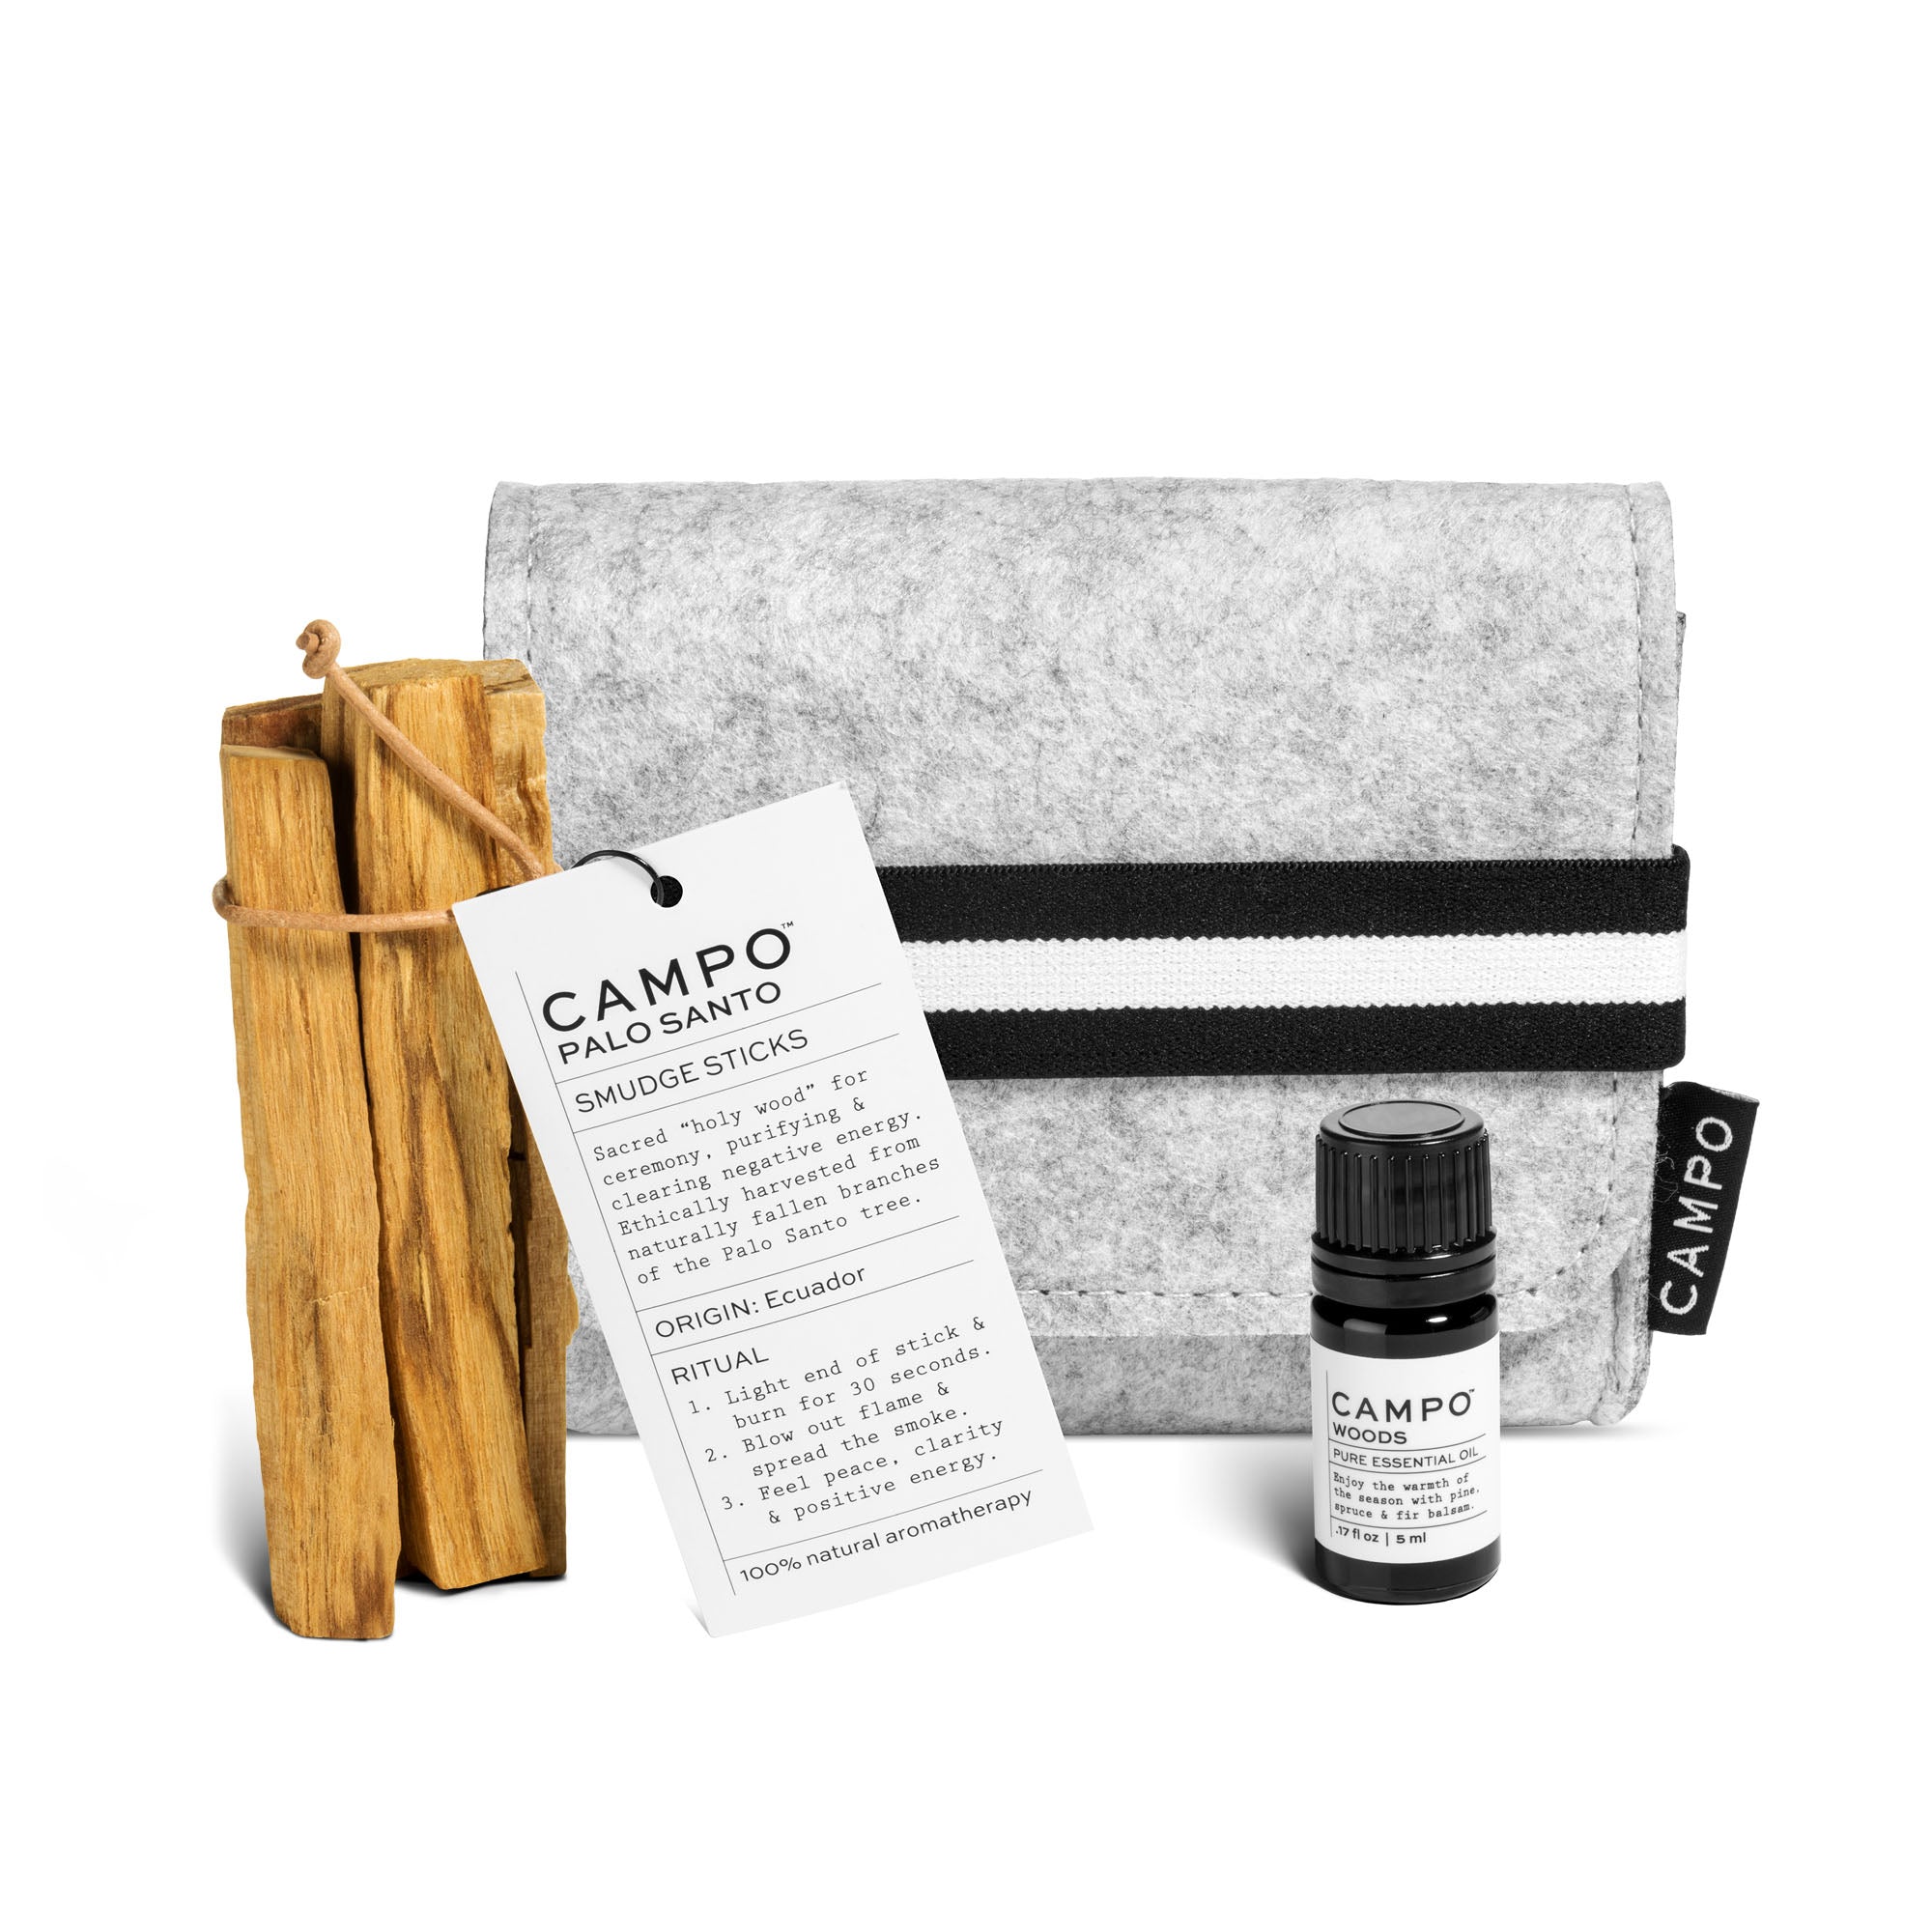 Campo Beauty Lift the spirits of any space or mood with this WOOD Kit.   Includes: WOODS PURE ESSENTIAL OIL 5ml + PALO SANTO + Grey Felt Bag.  WOODS: Transport & Transform yourself with this 100% pure essential oil blend of Pine Scotch, Siberian Fir, Balsam Fir, Black Spruce, and Bergamot. A distinctive scent inspired by the smell of a fresh-cut tree and a walk in the woods. A perfect complement to CAMPO essential oil diffusers. Add a few drops to your shower for the ultimate indoor adventure.